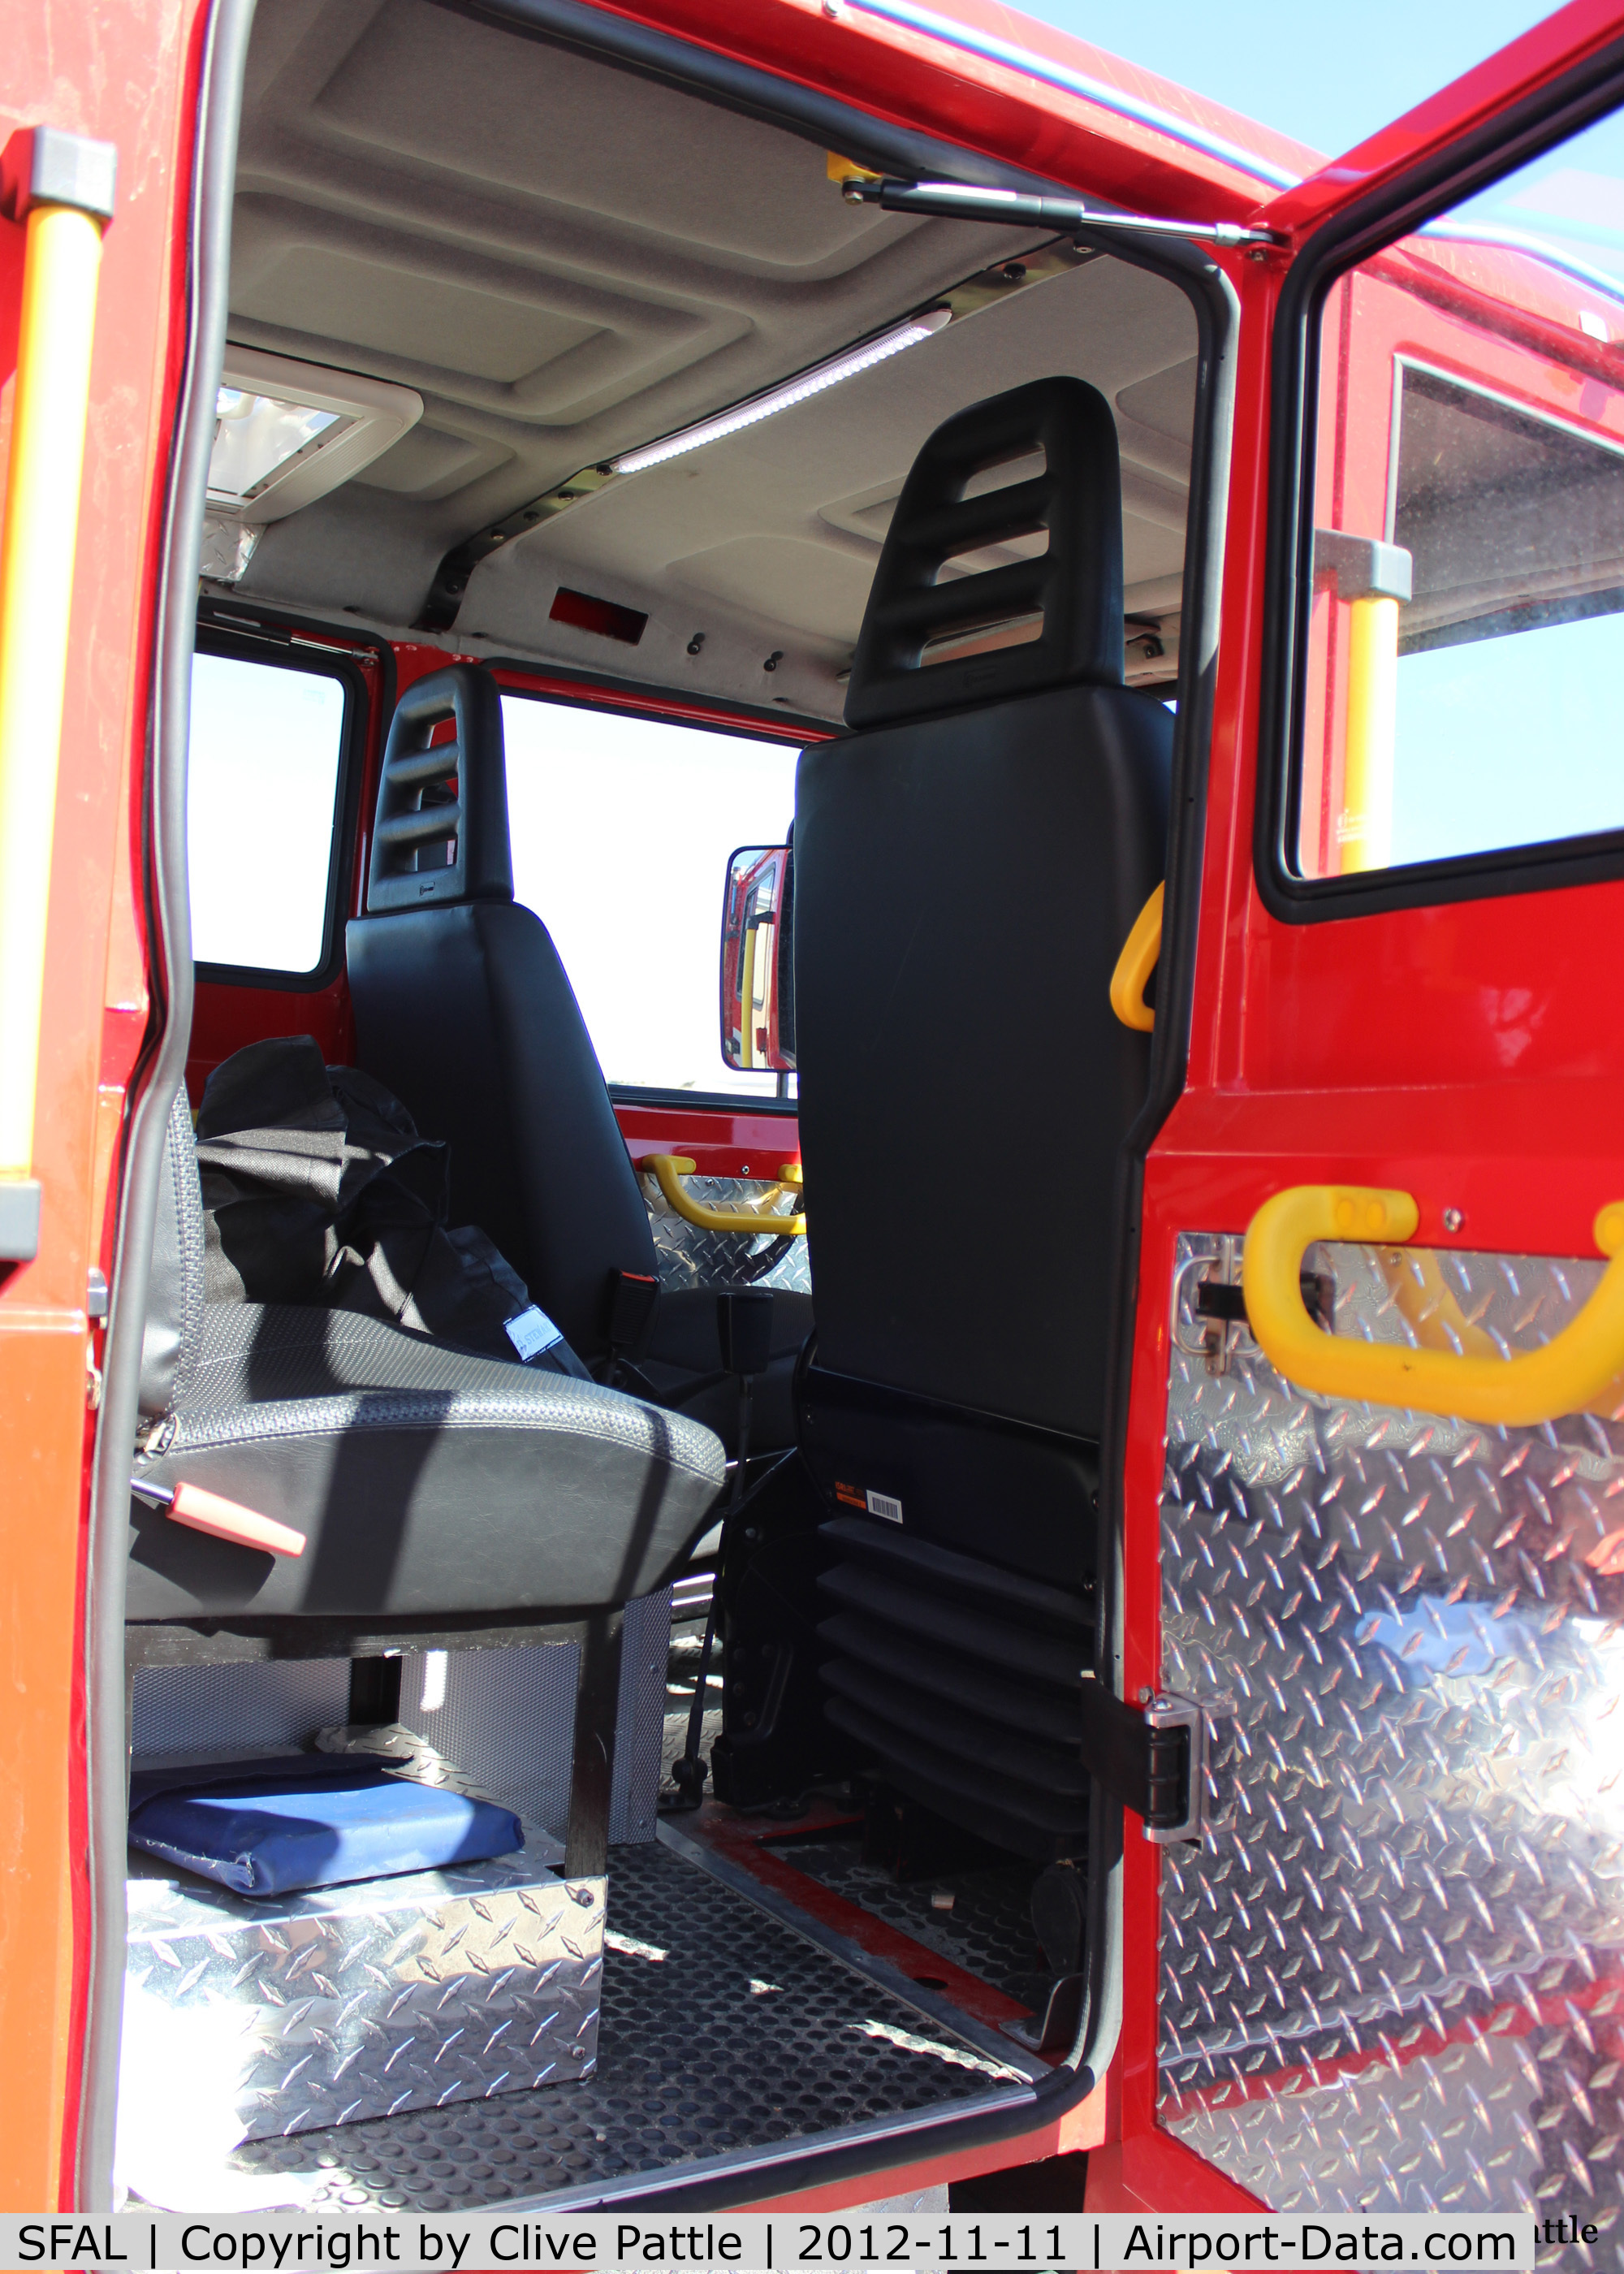 SFAL Airport - A view within the crew area of a Bremach Fire Rescue tender at Port Stanley SFAL